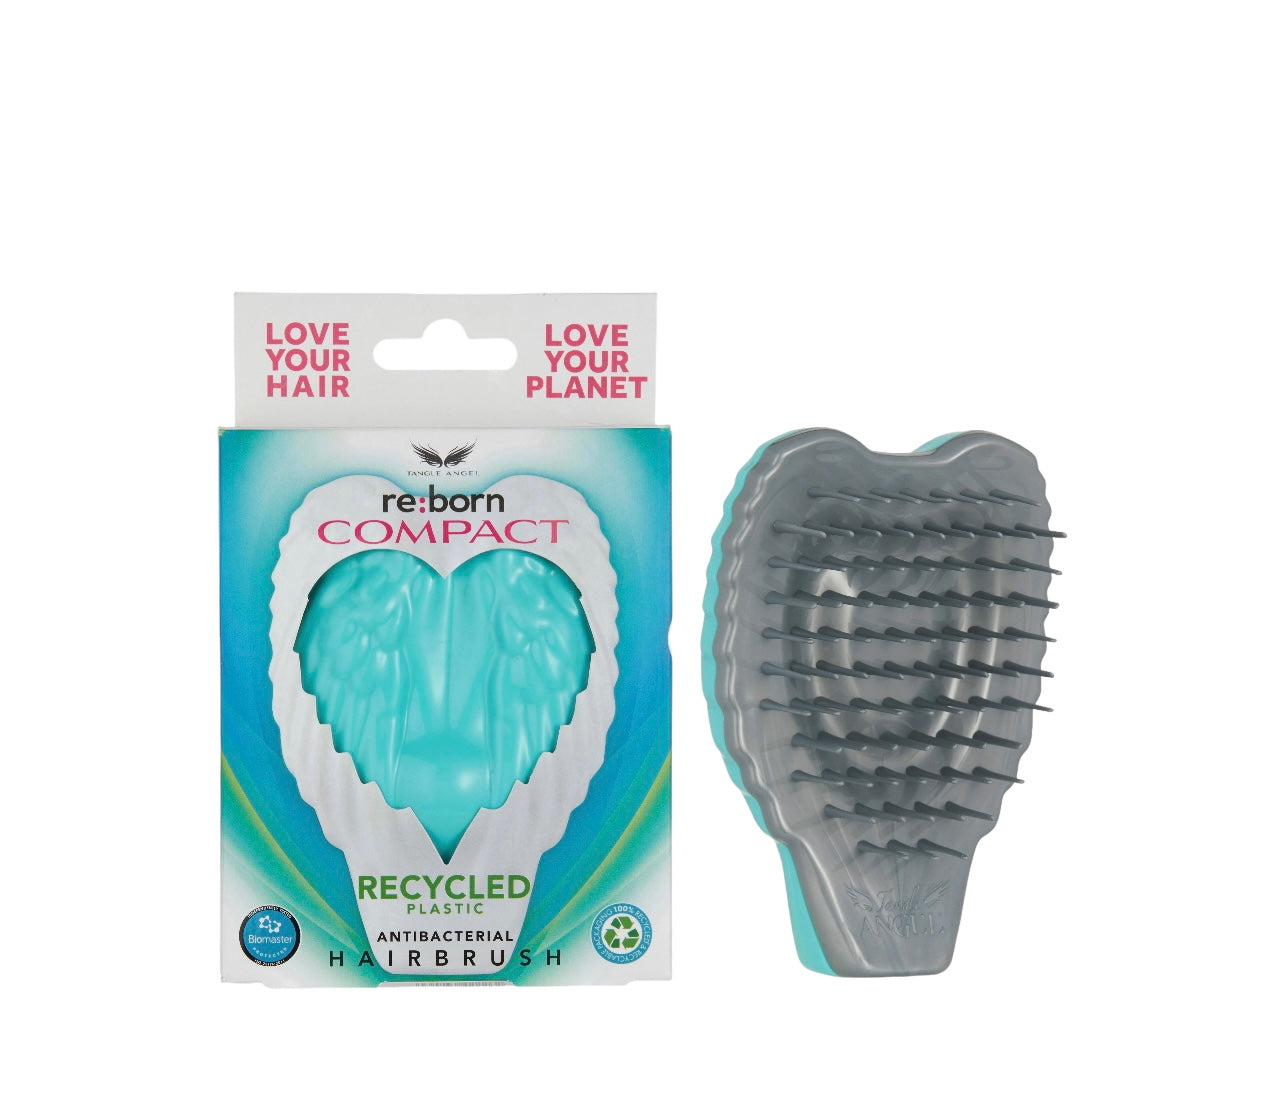 Tangle Angel RE:BORN Compact aqua reborn in the UK from recycled plastic, antibacterial hairbrush, love your hair, love your planet Phoenix Nationale